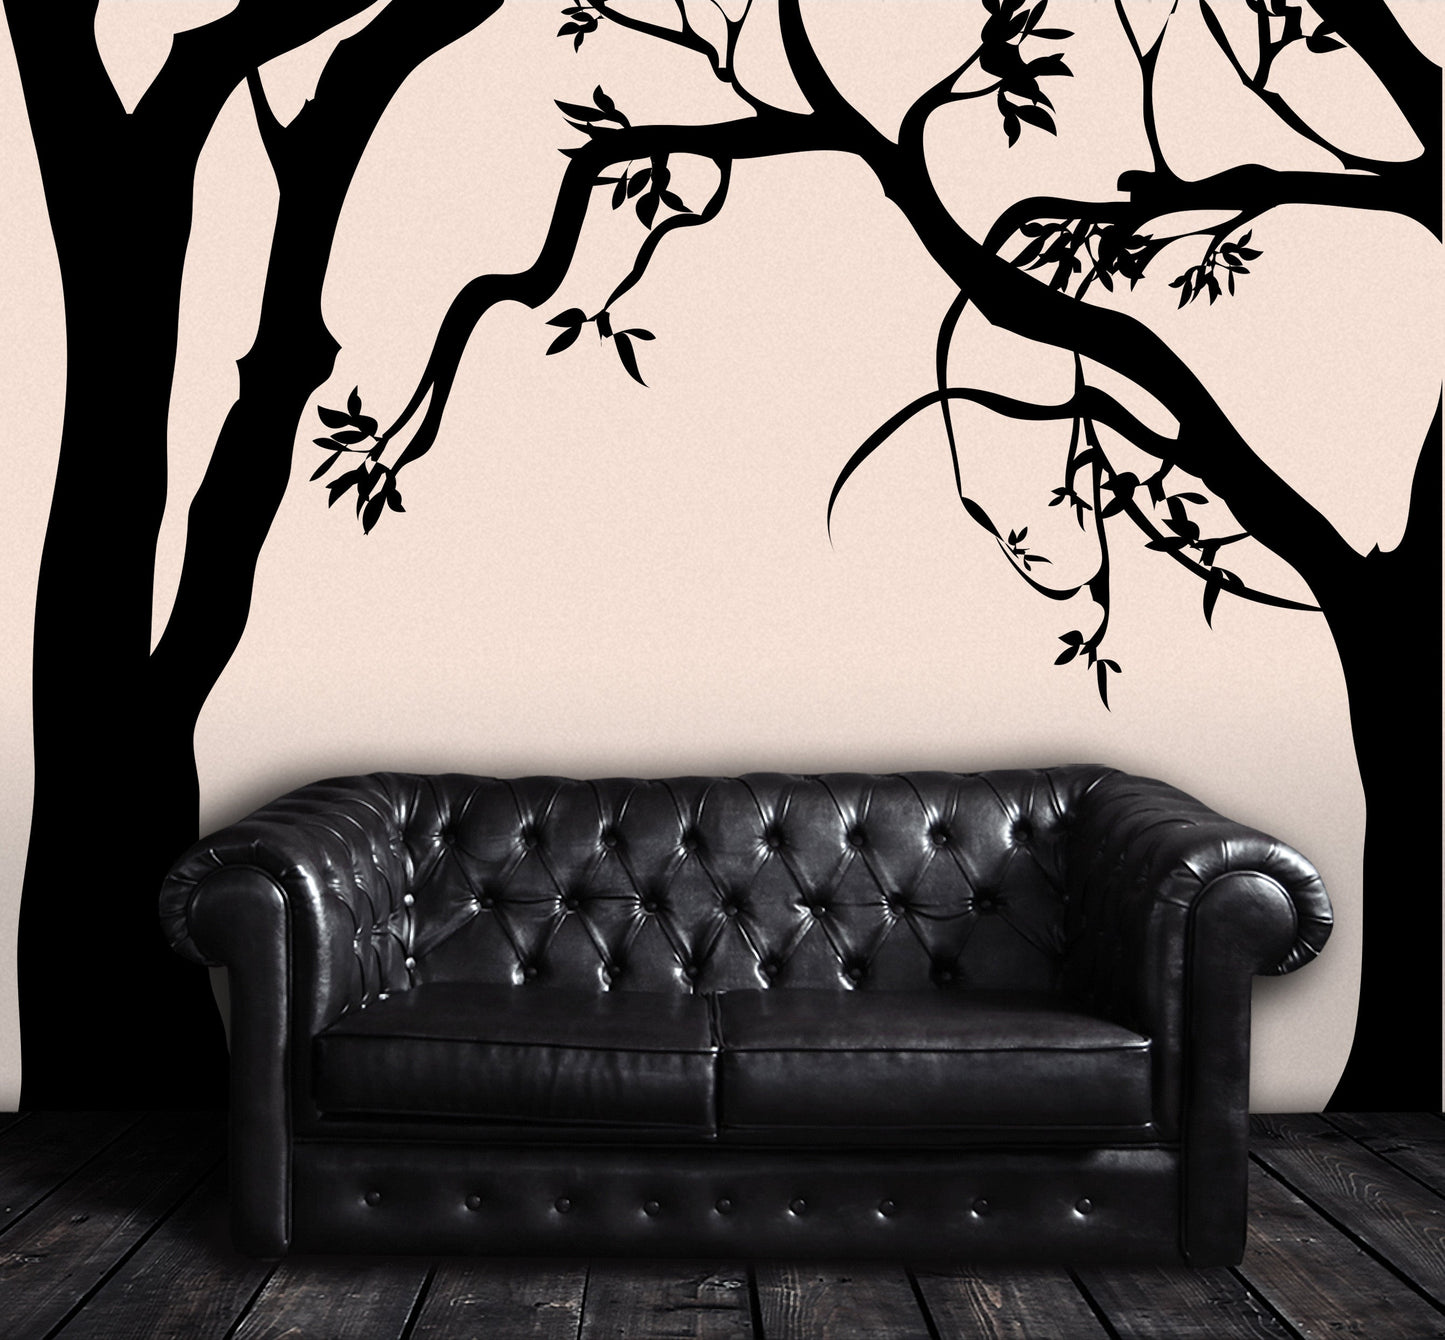 Twisted Trees Wall Decal Sticker. #AC114